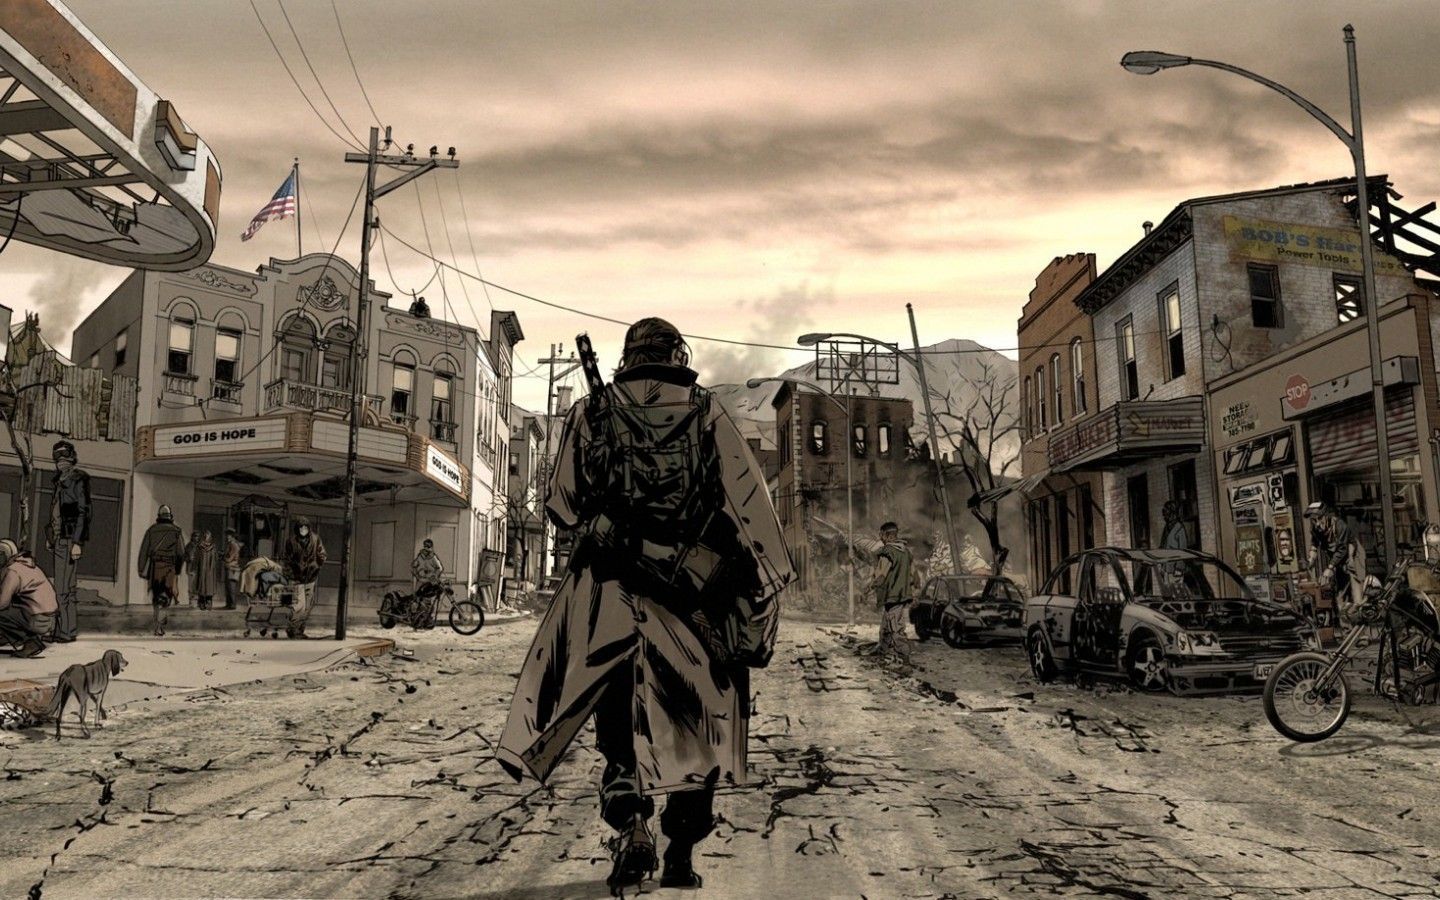 Random Post Apocalyptic Wallpapers and Images | Post-Apocalypse ...